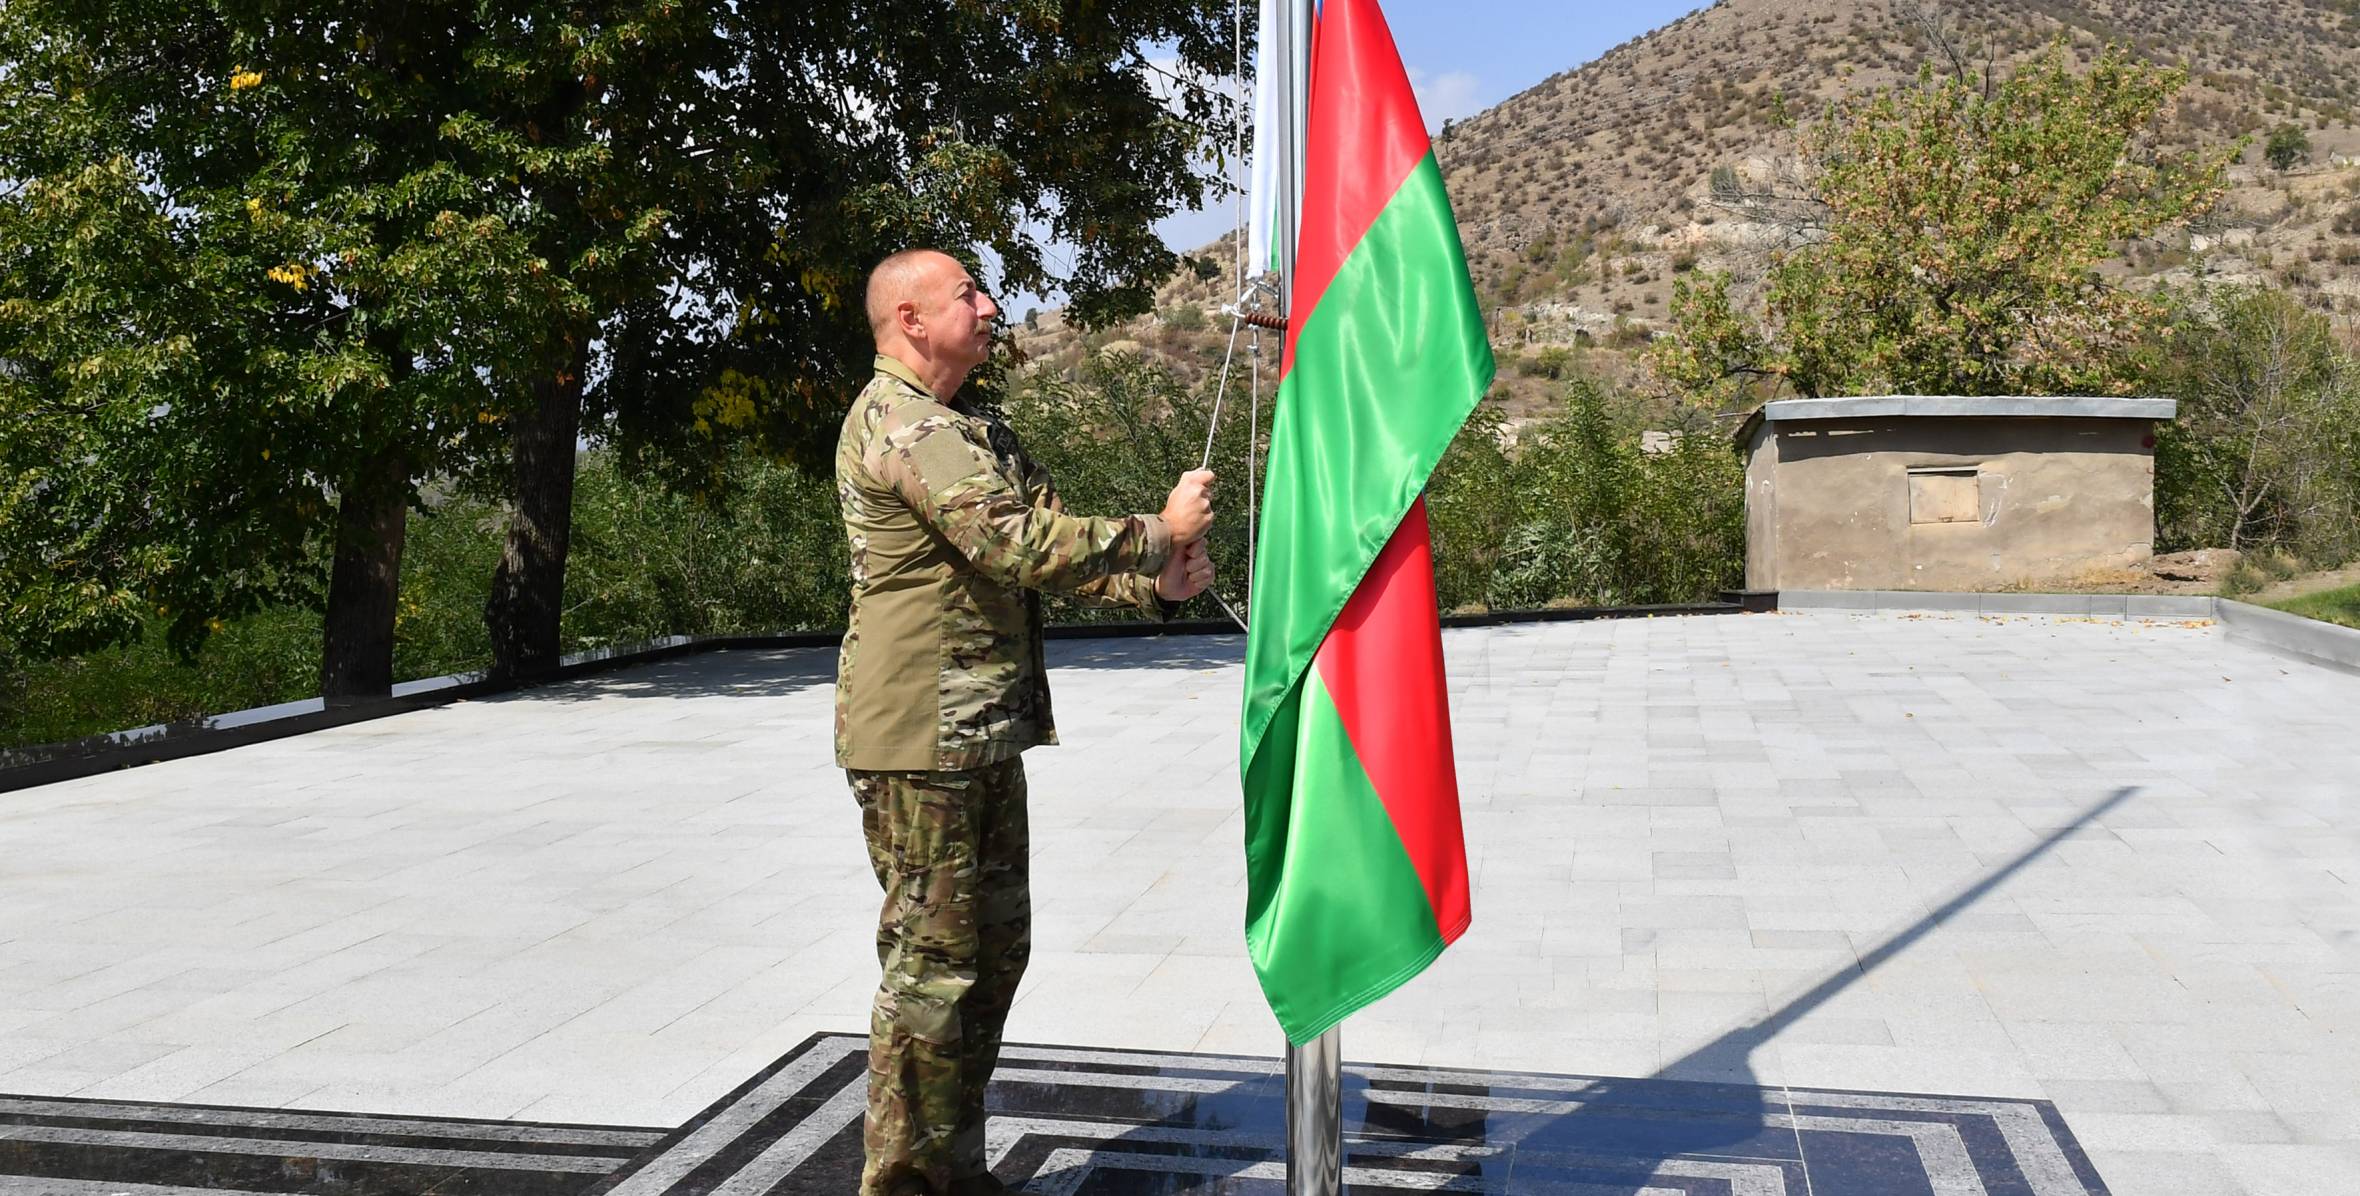 Ilham Aliyev has raised the flag of Azerbaijan in the center of the city of Lachin